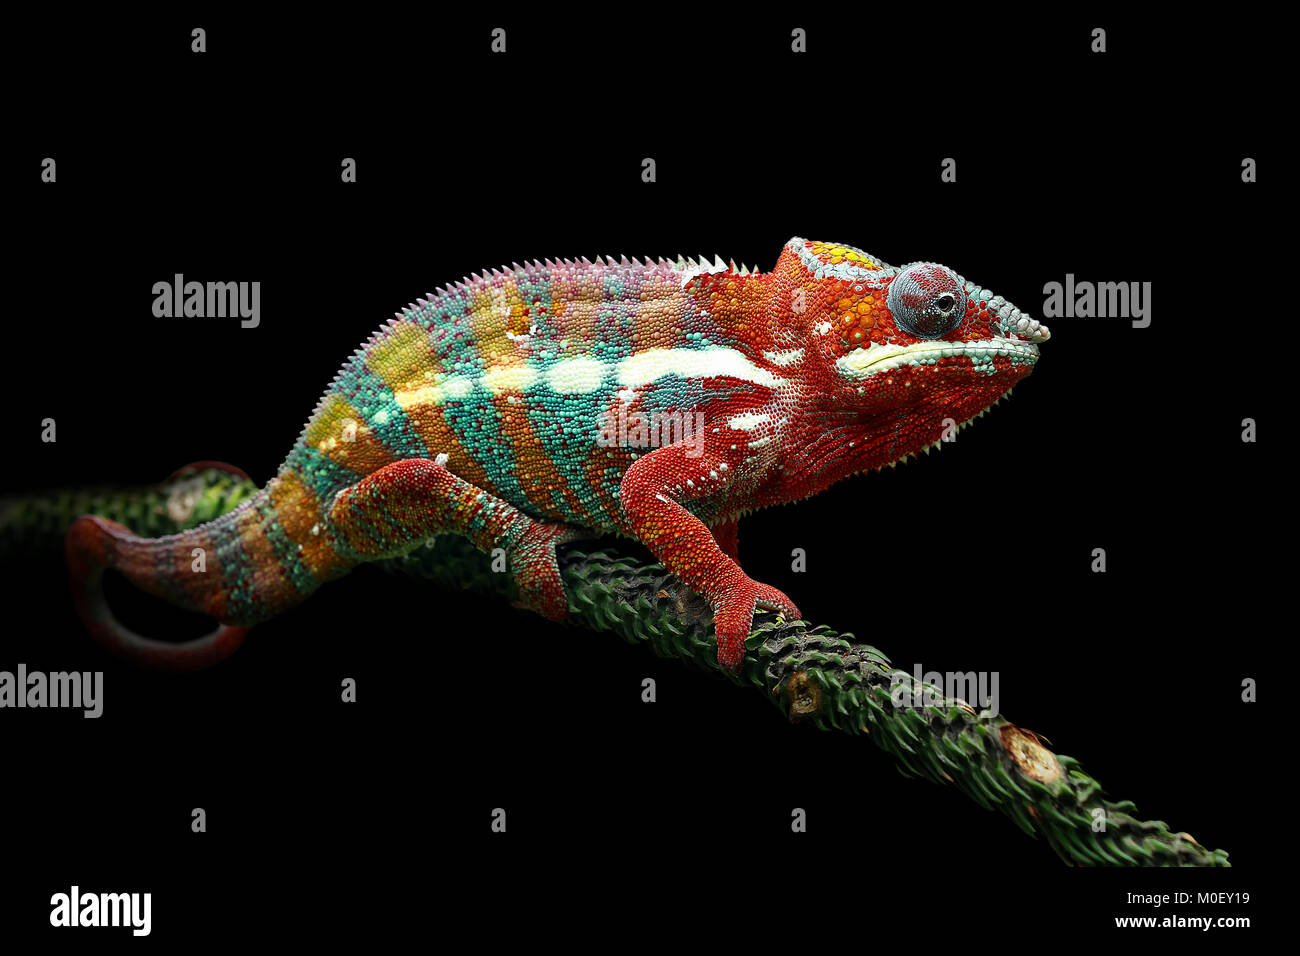 Panther Chameleon on a branch Stock Photo